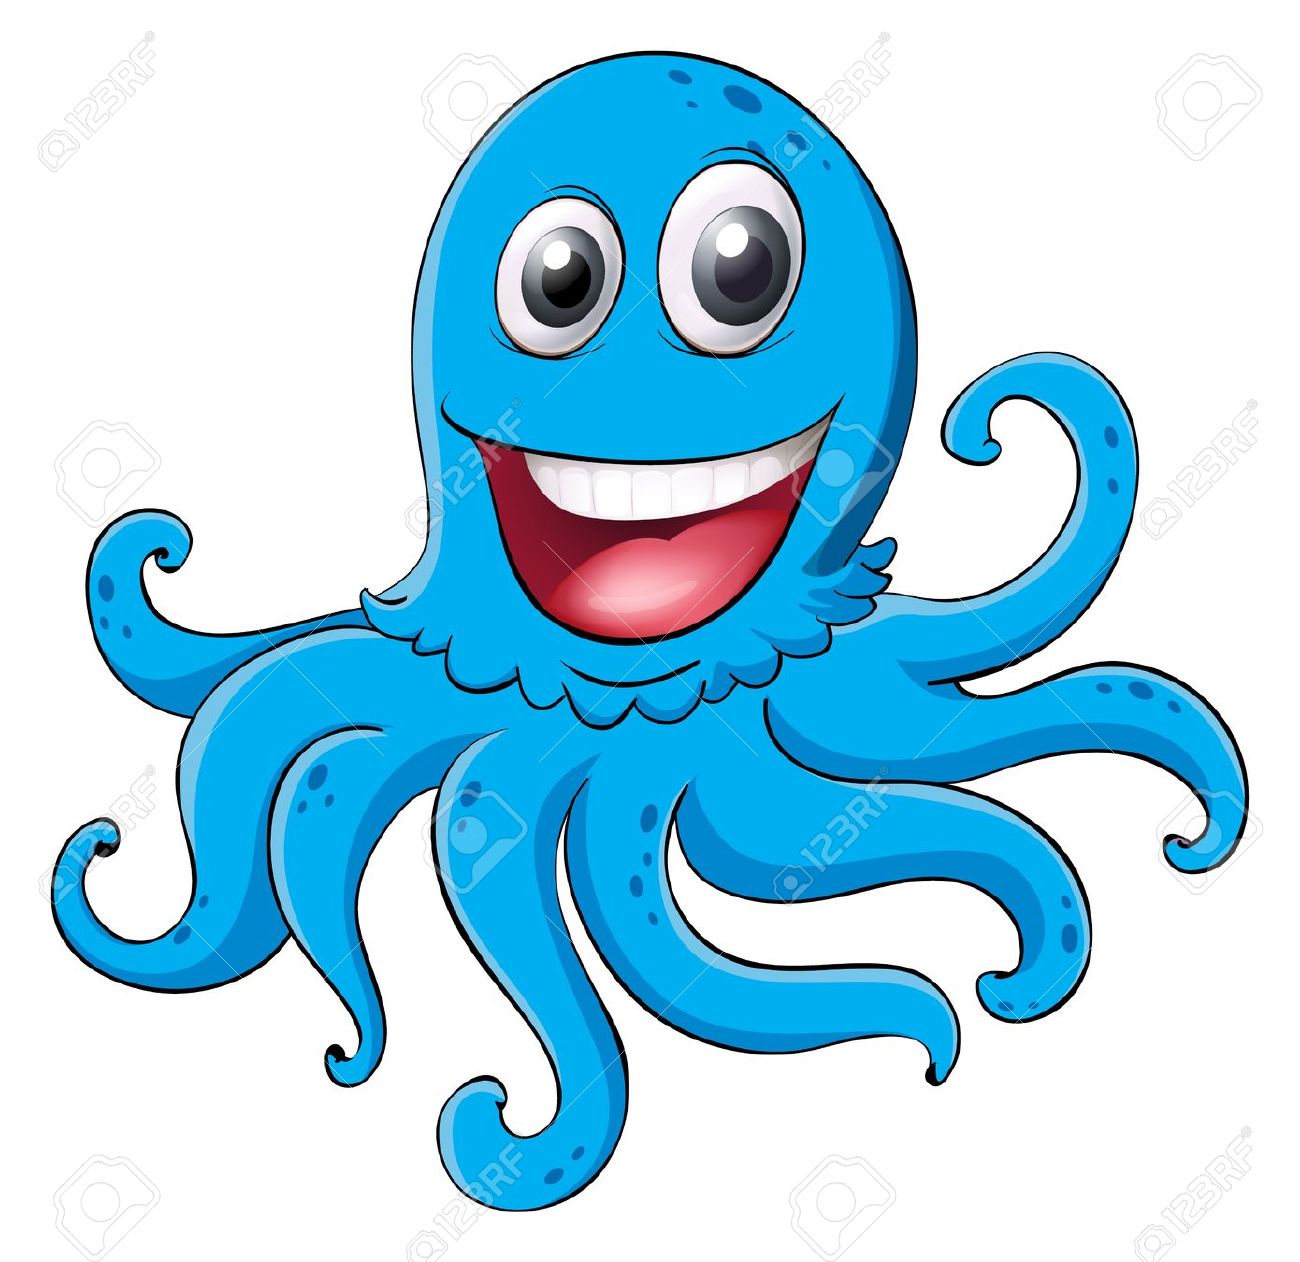 12,813 Octopus Stock Vector Illustration And Royalty Free Octopus.